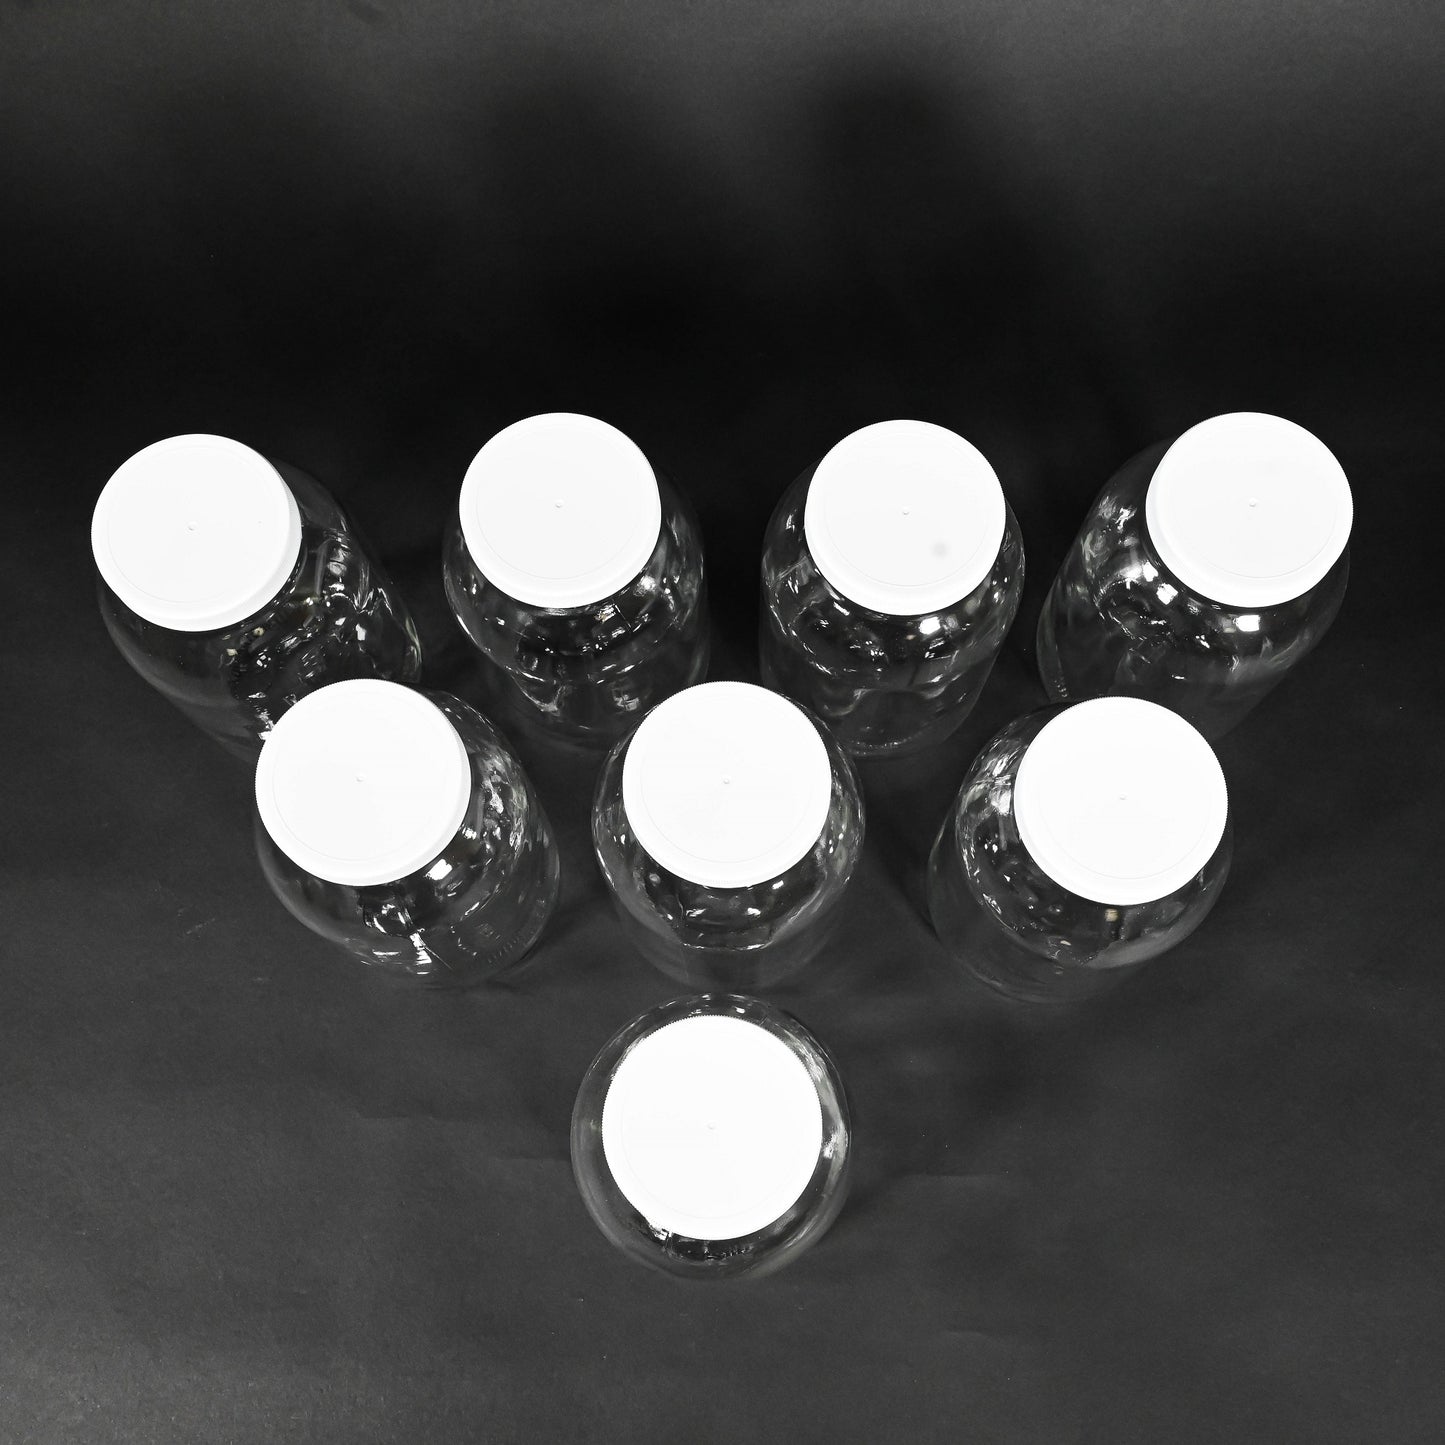 Eight glass bottles with caps